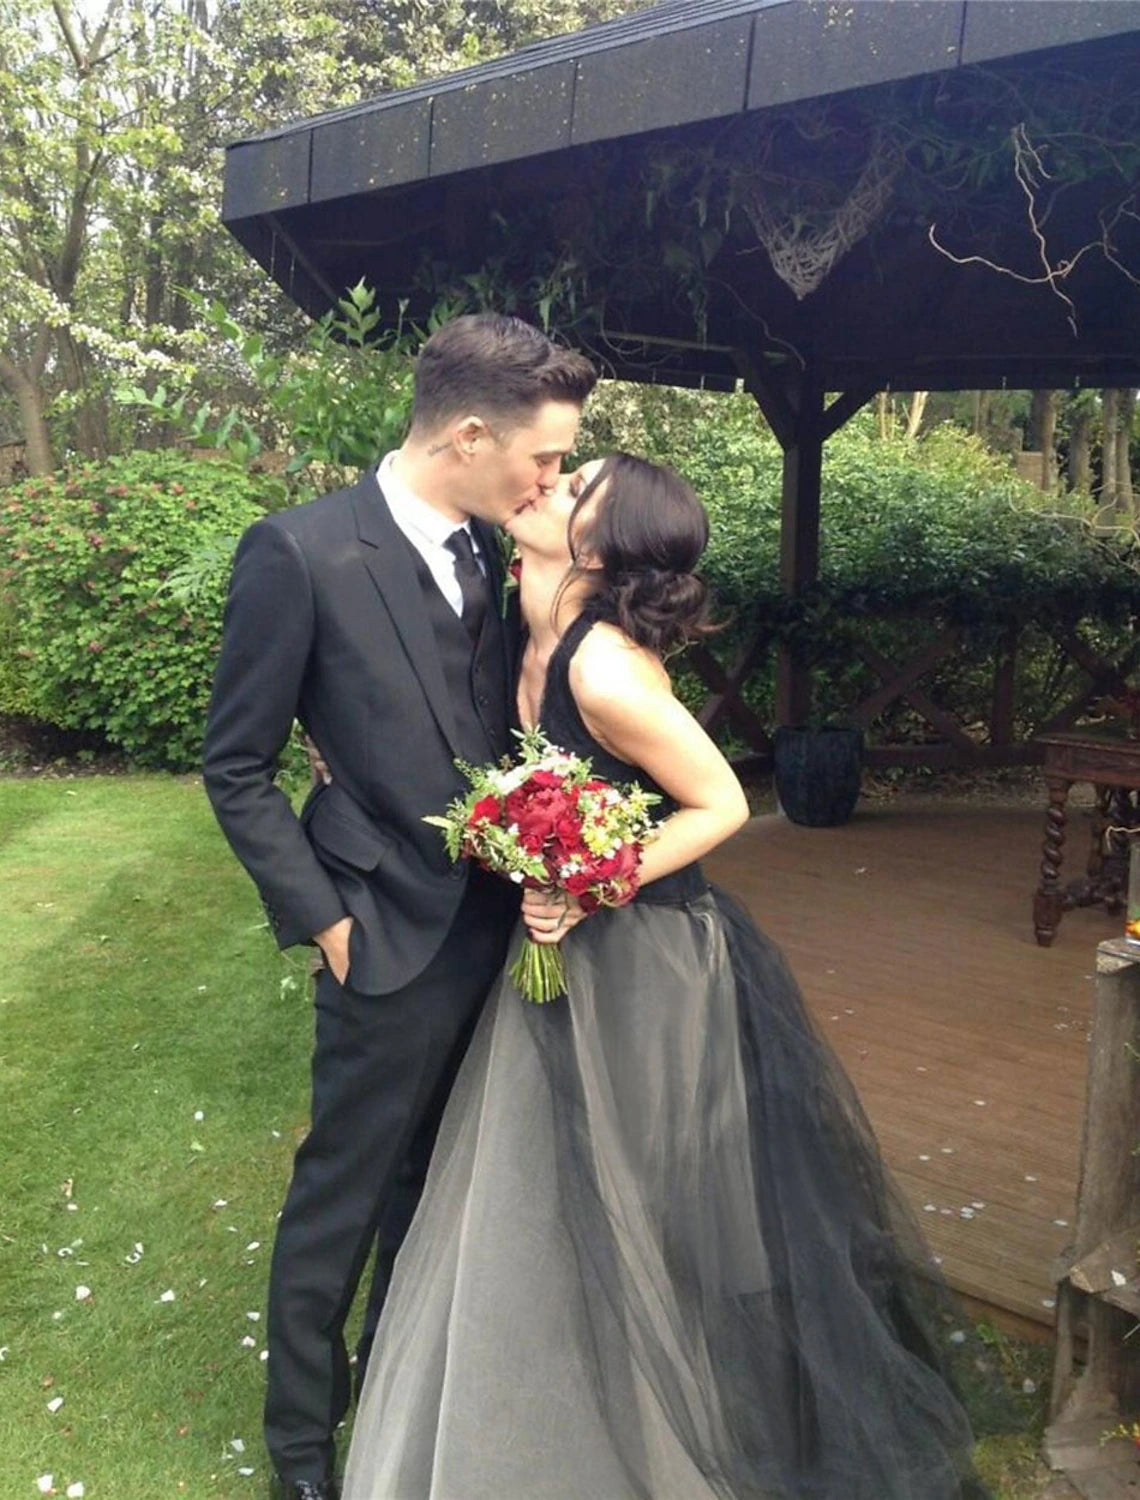 Engagement Gothic Wedding Dresses in Color Formal Wedding Dresses A-Line Halter Neck Sleeveless Floor Length Satin Bridal Gowns With Appliques